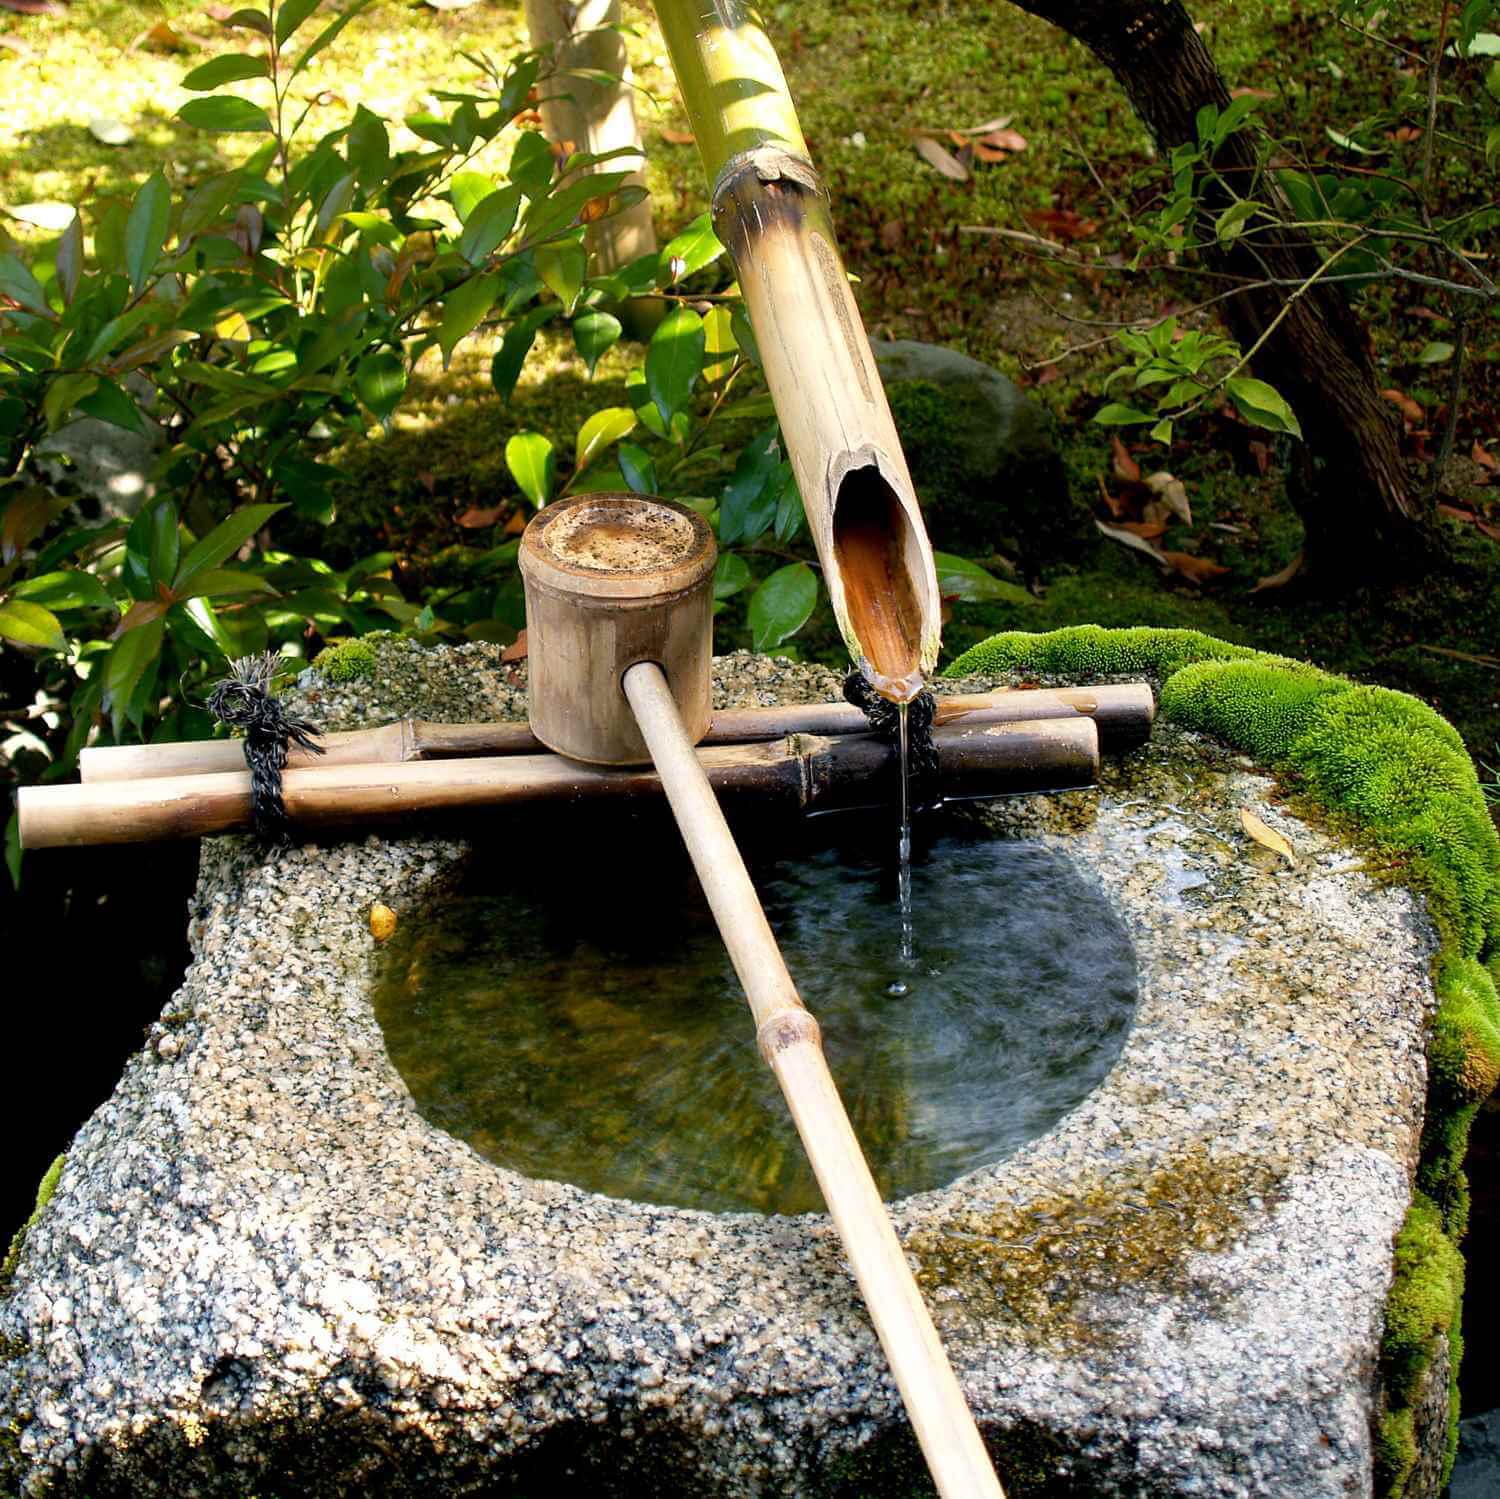 You can find various bamboo products in Japanese gardens, etc. = Shutterstock